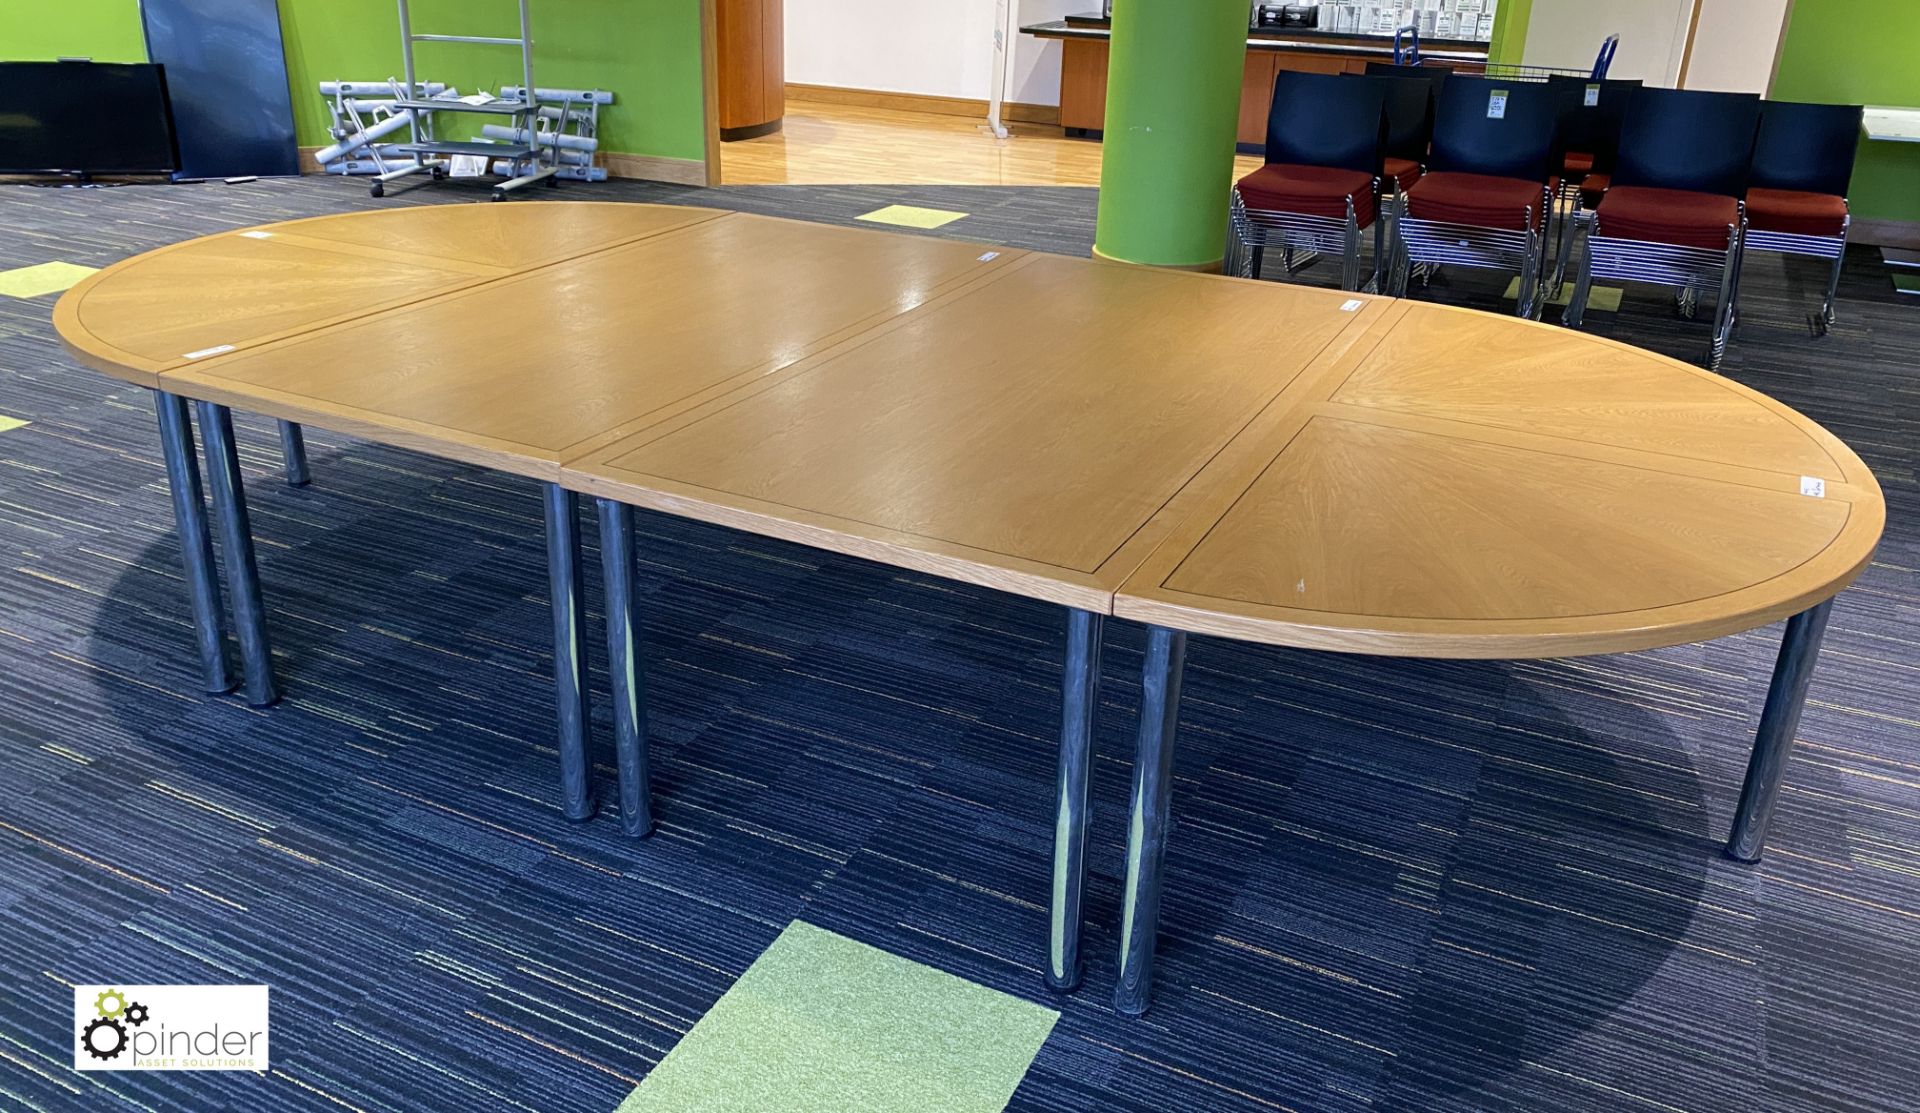 Light oak inlaid 4-section Boardroom Table, total overall dimension 4000mm x 2000mm